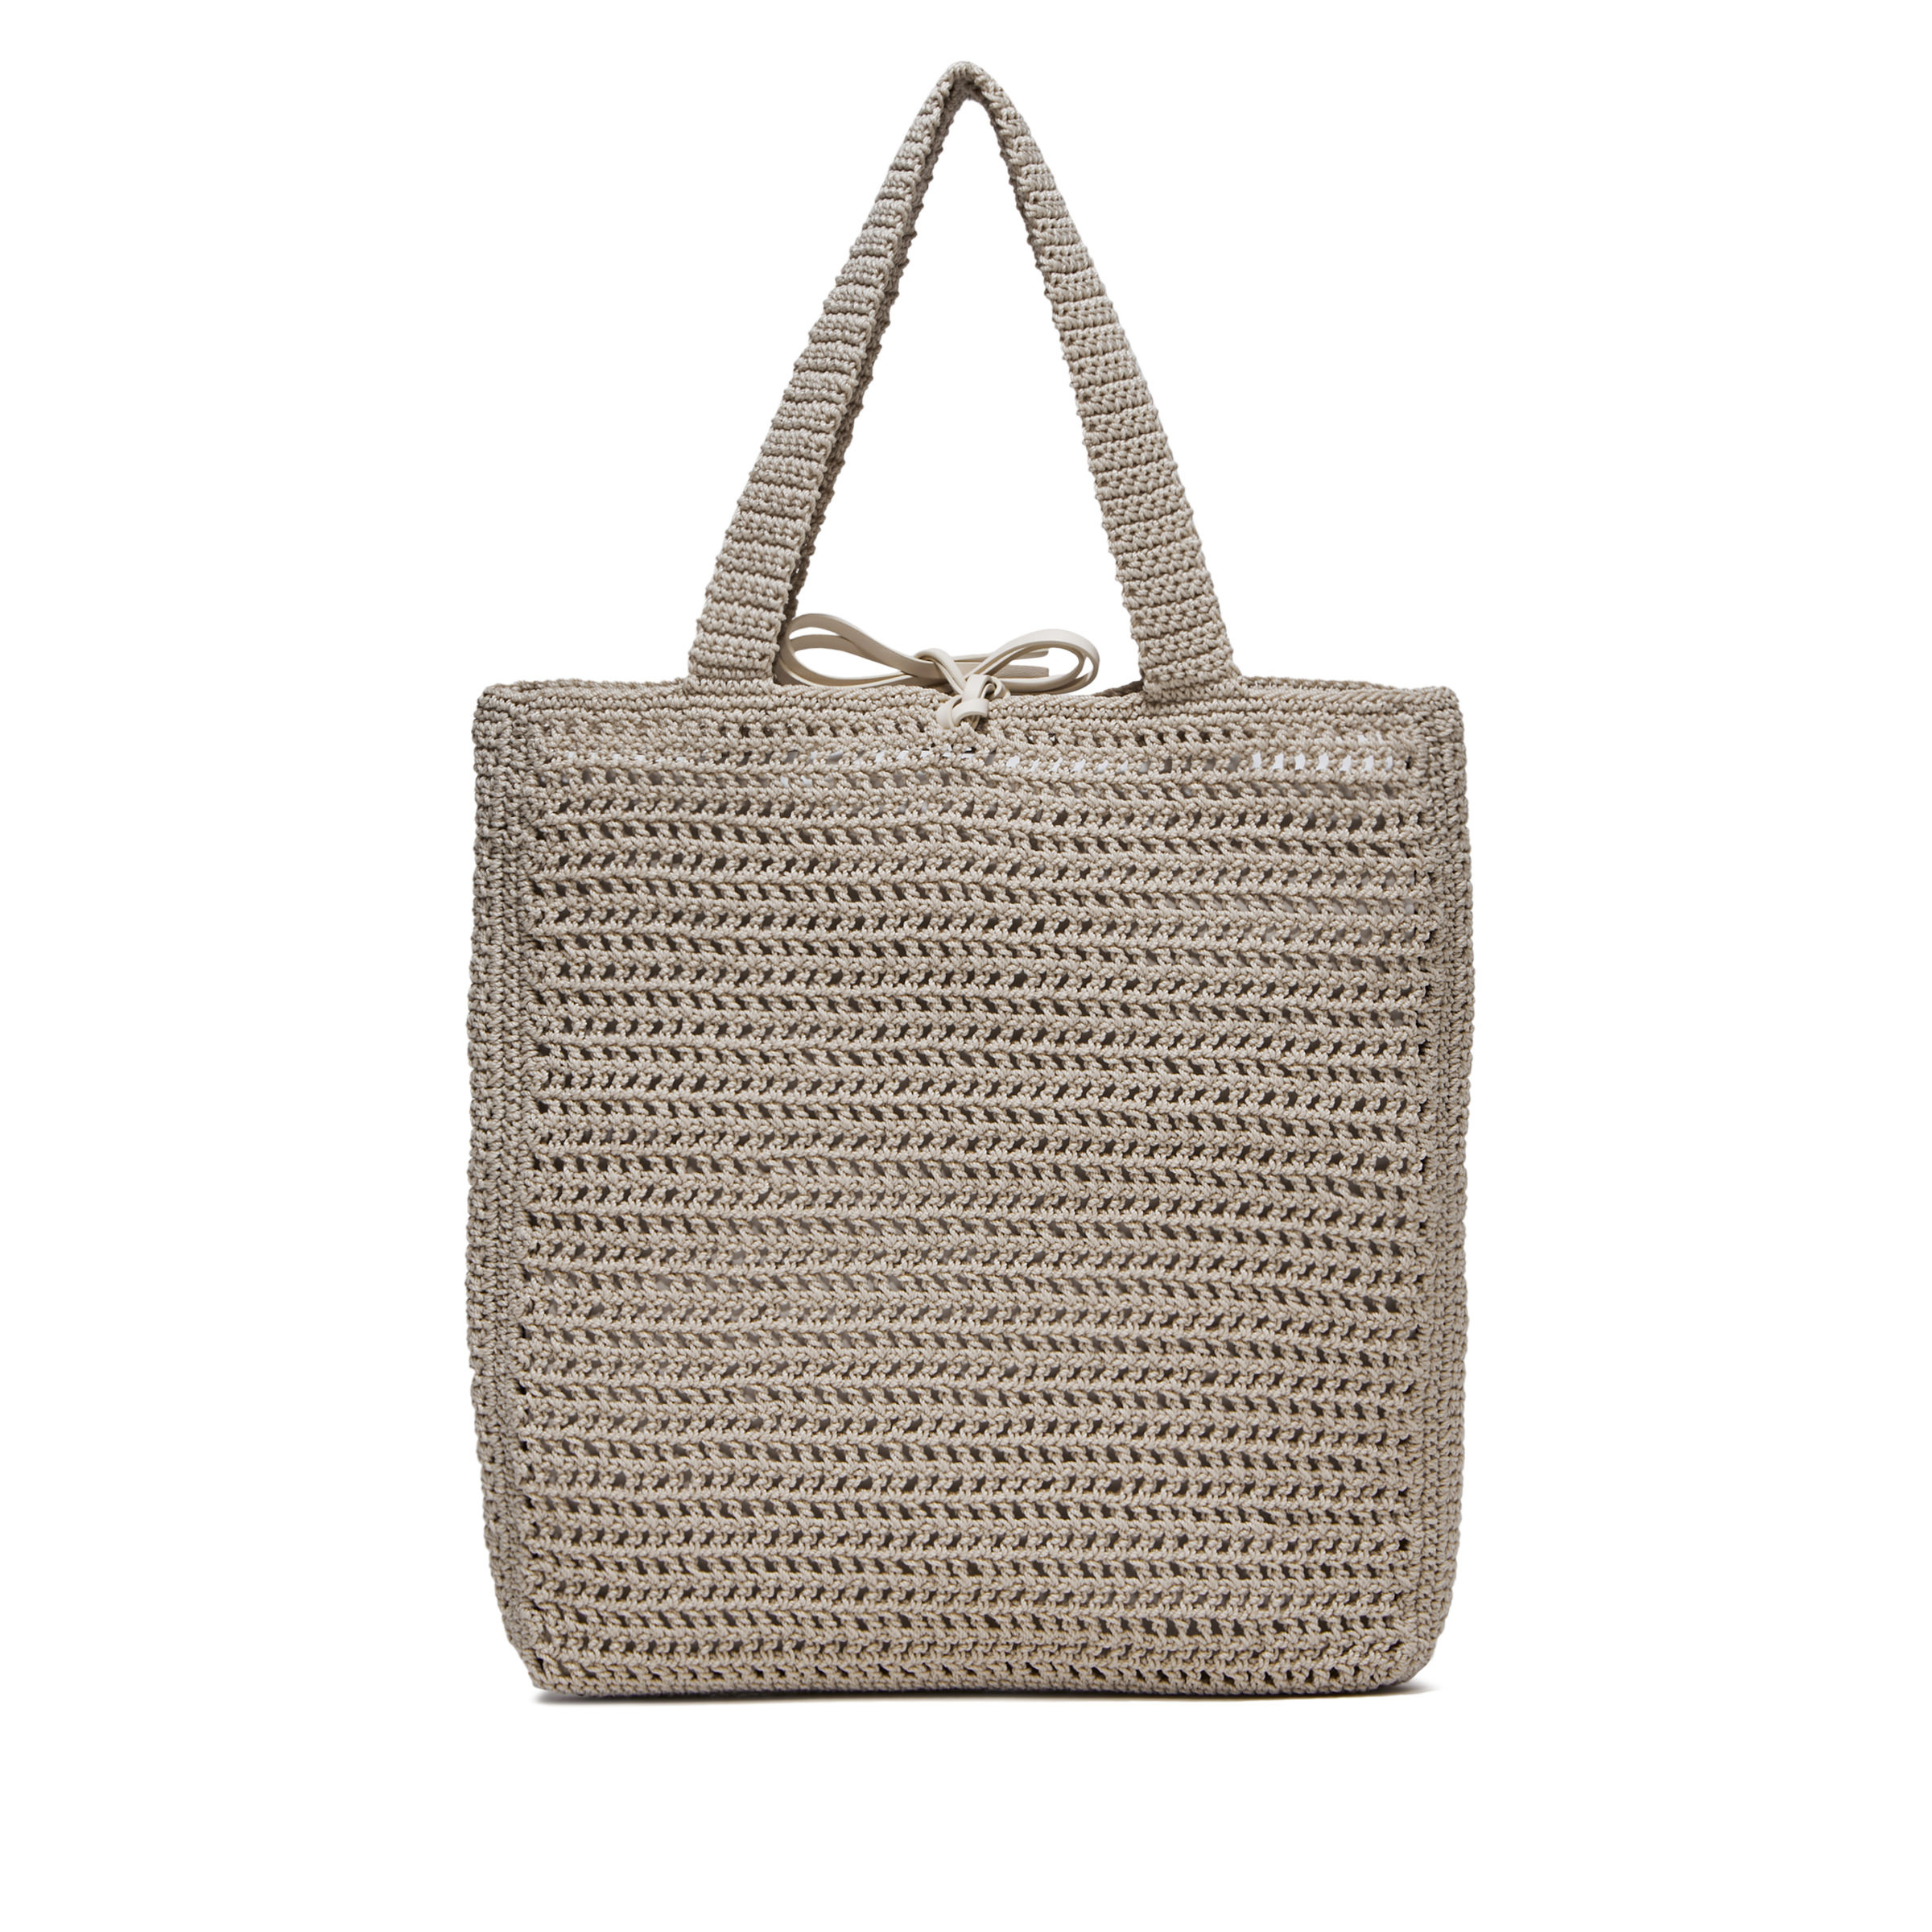 Gianni Chiarini - Victoria bag in leather and fabric, Pearl Grey, large image number 1